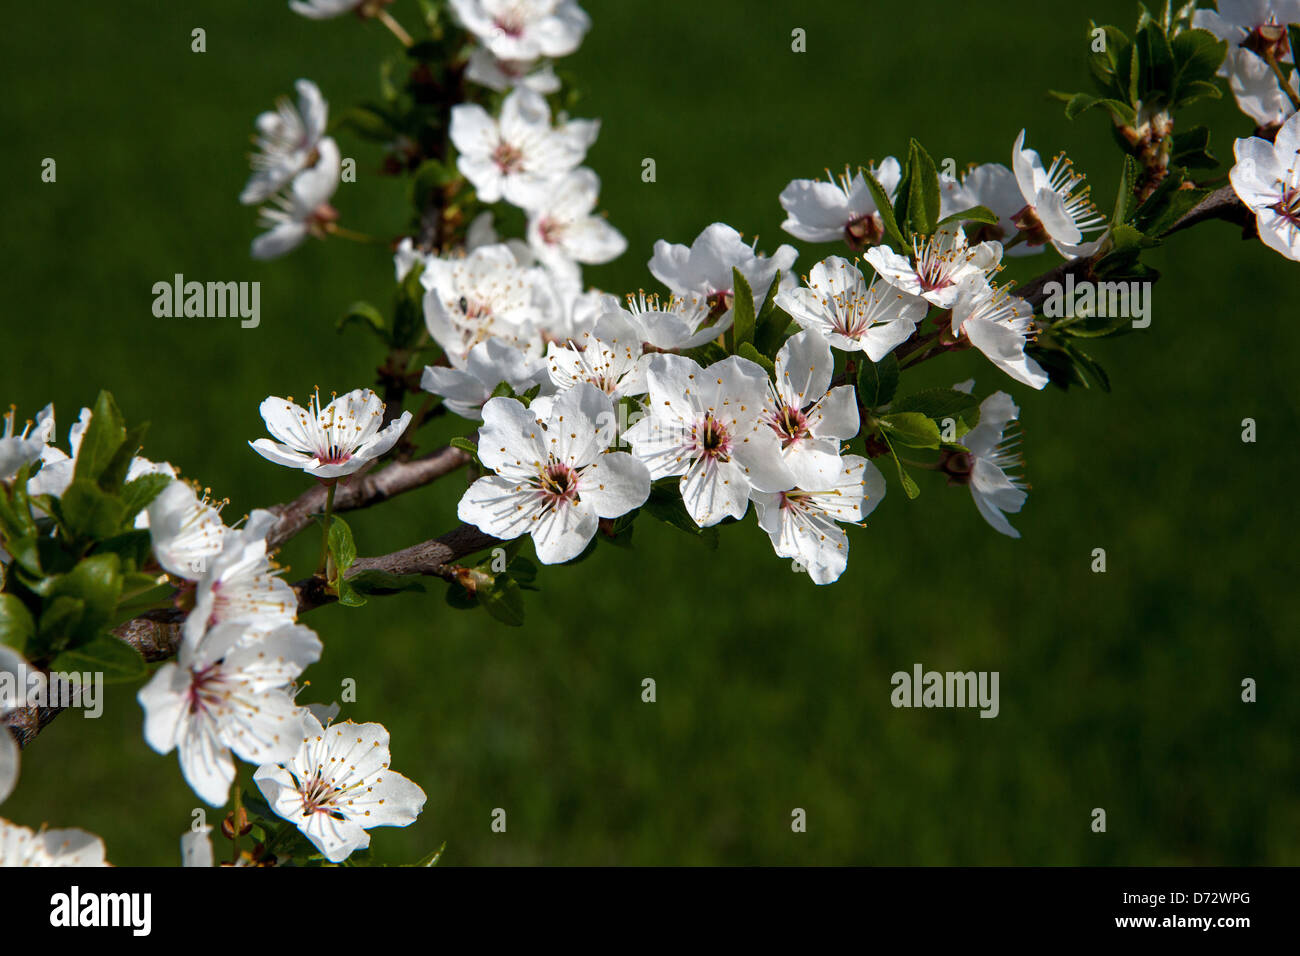 Close Up of Blossoms on a branch in Early Spring, Close up, Cherry tree, melliferous, Blossoms, Spring, White, Flowers, Blooming, Flower, tree Stock Photo